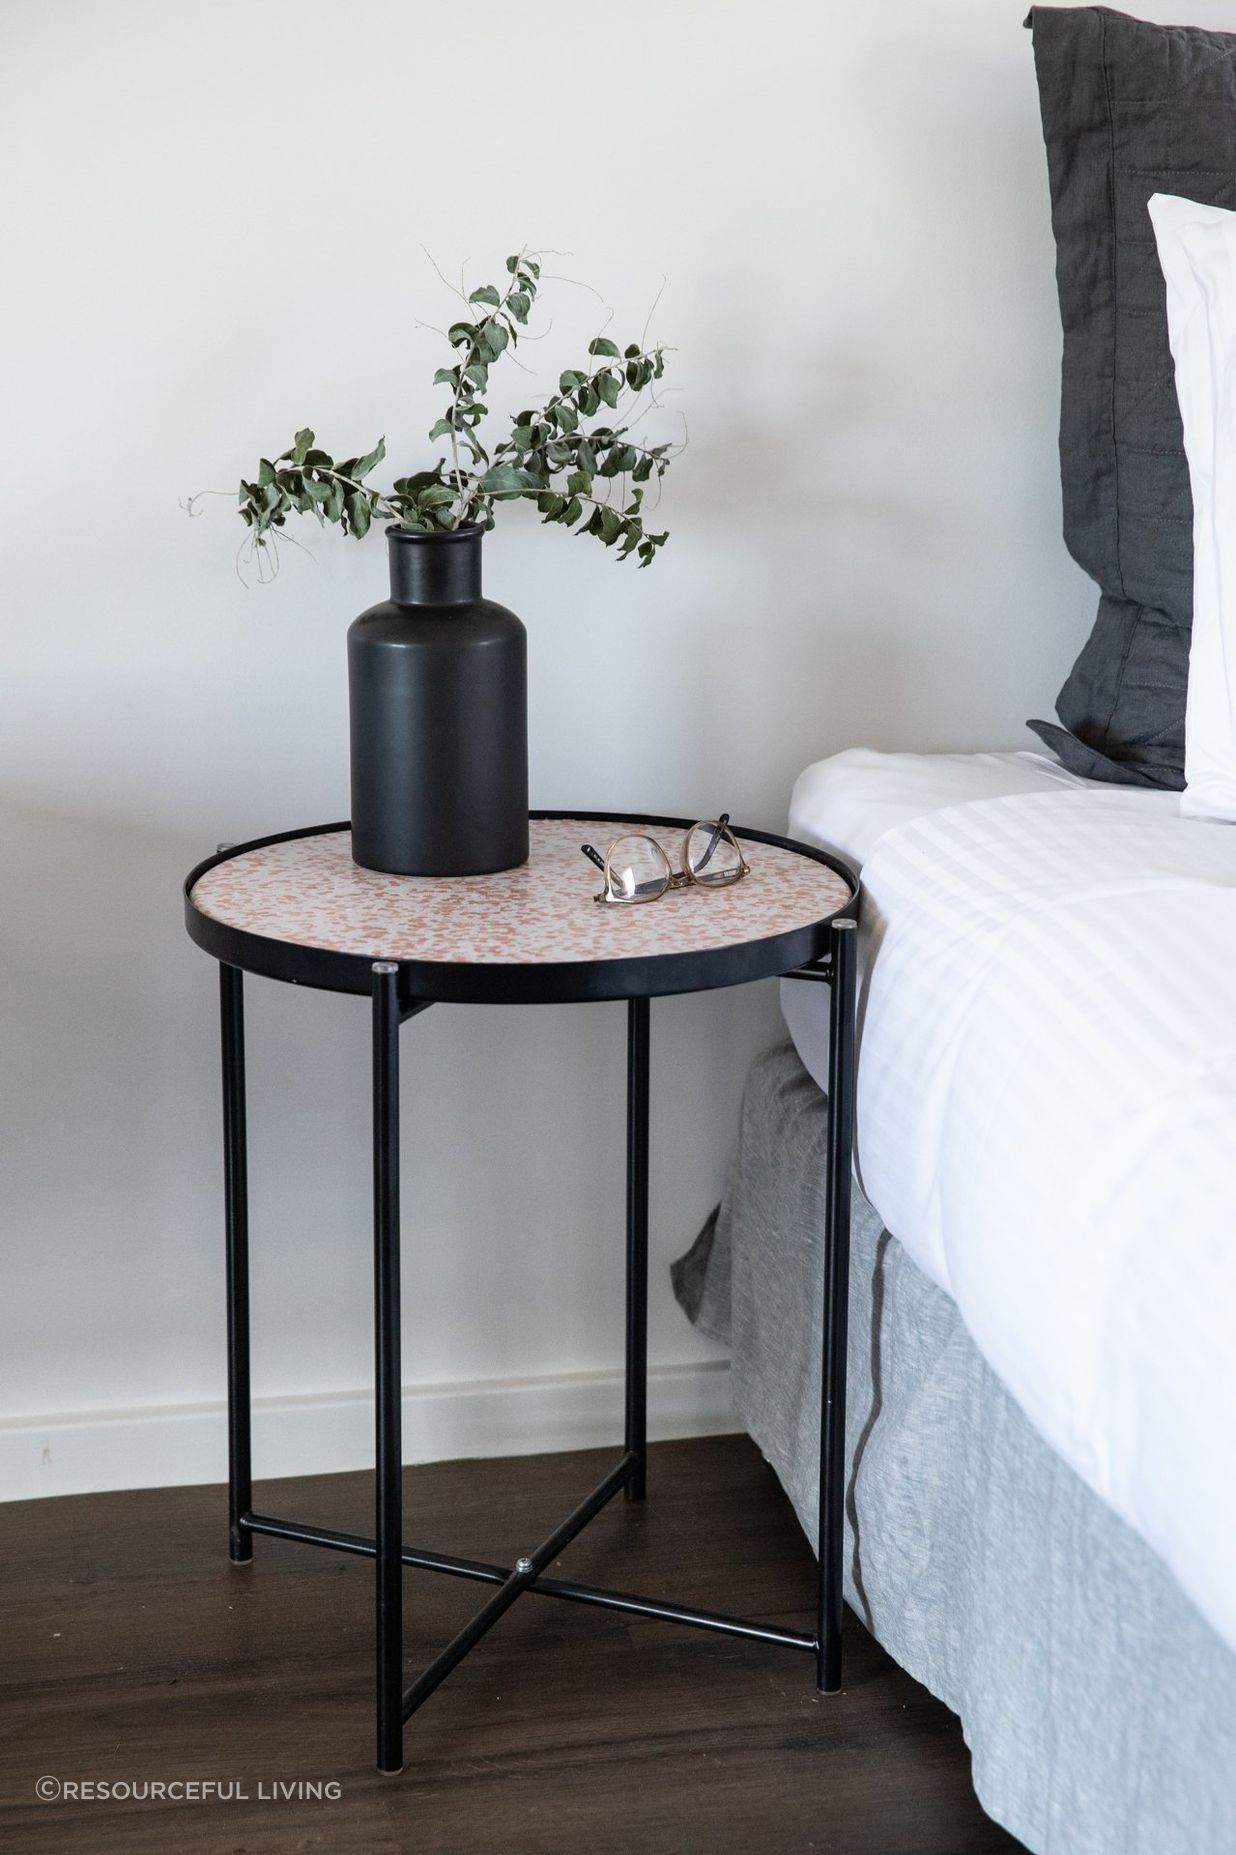 This Round Side Table works as a functional nightstand.